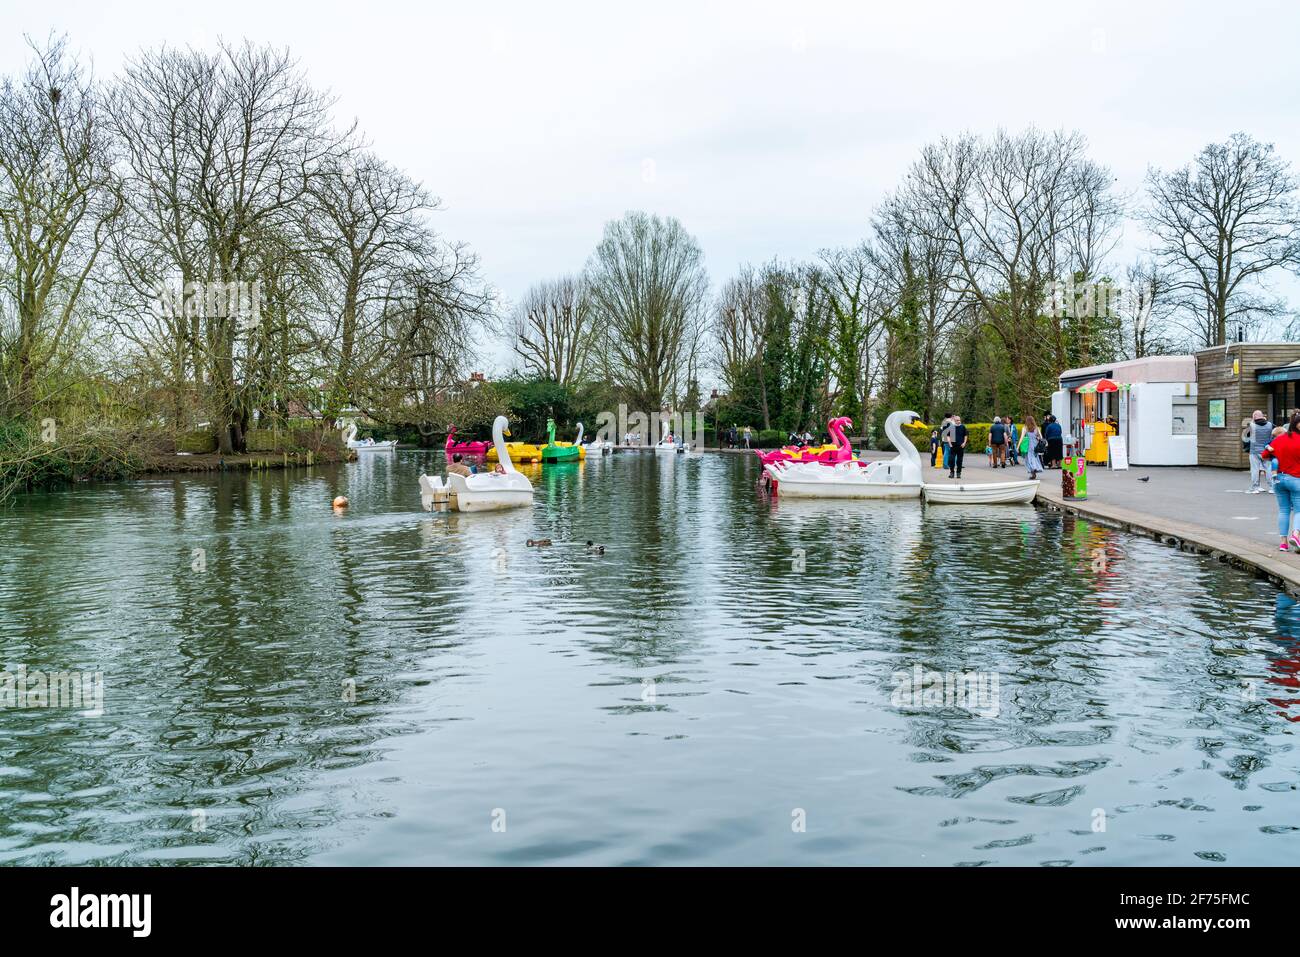 LONDON, UK - MARCH 31 2021: View of boating lake with pedal boats on at Alexandra Palace in London Stock Photo